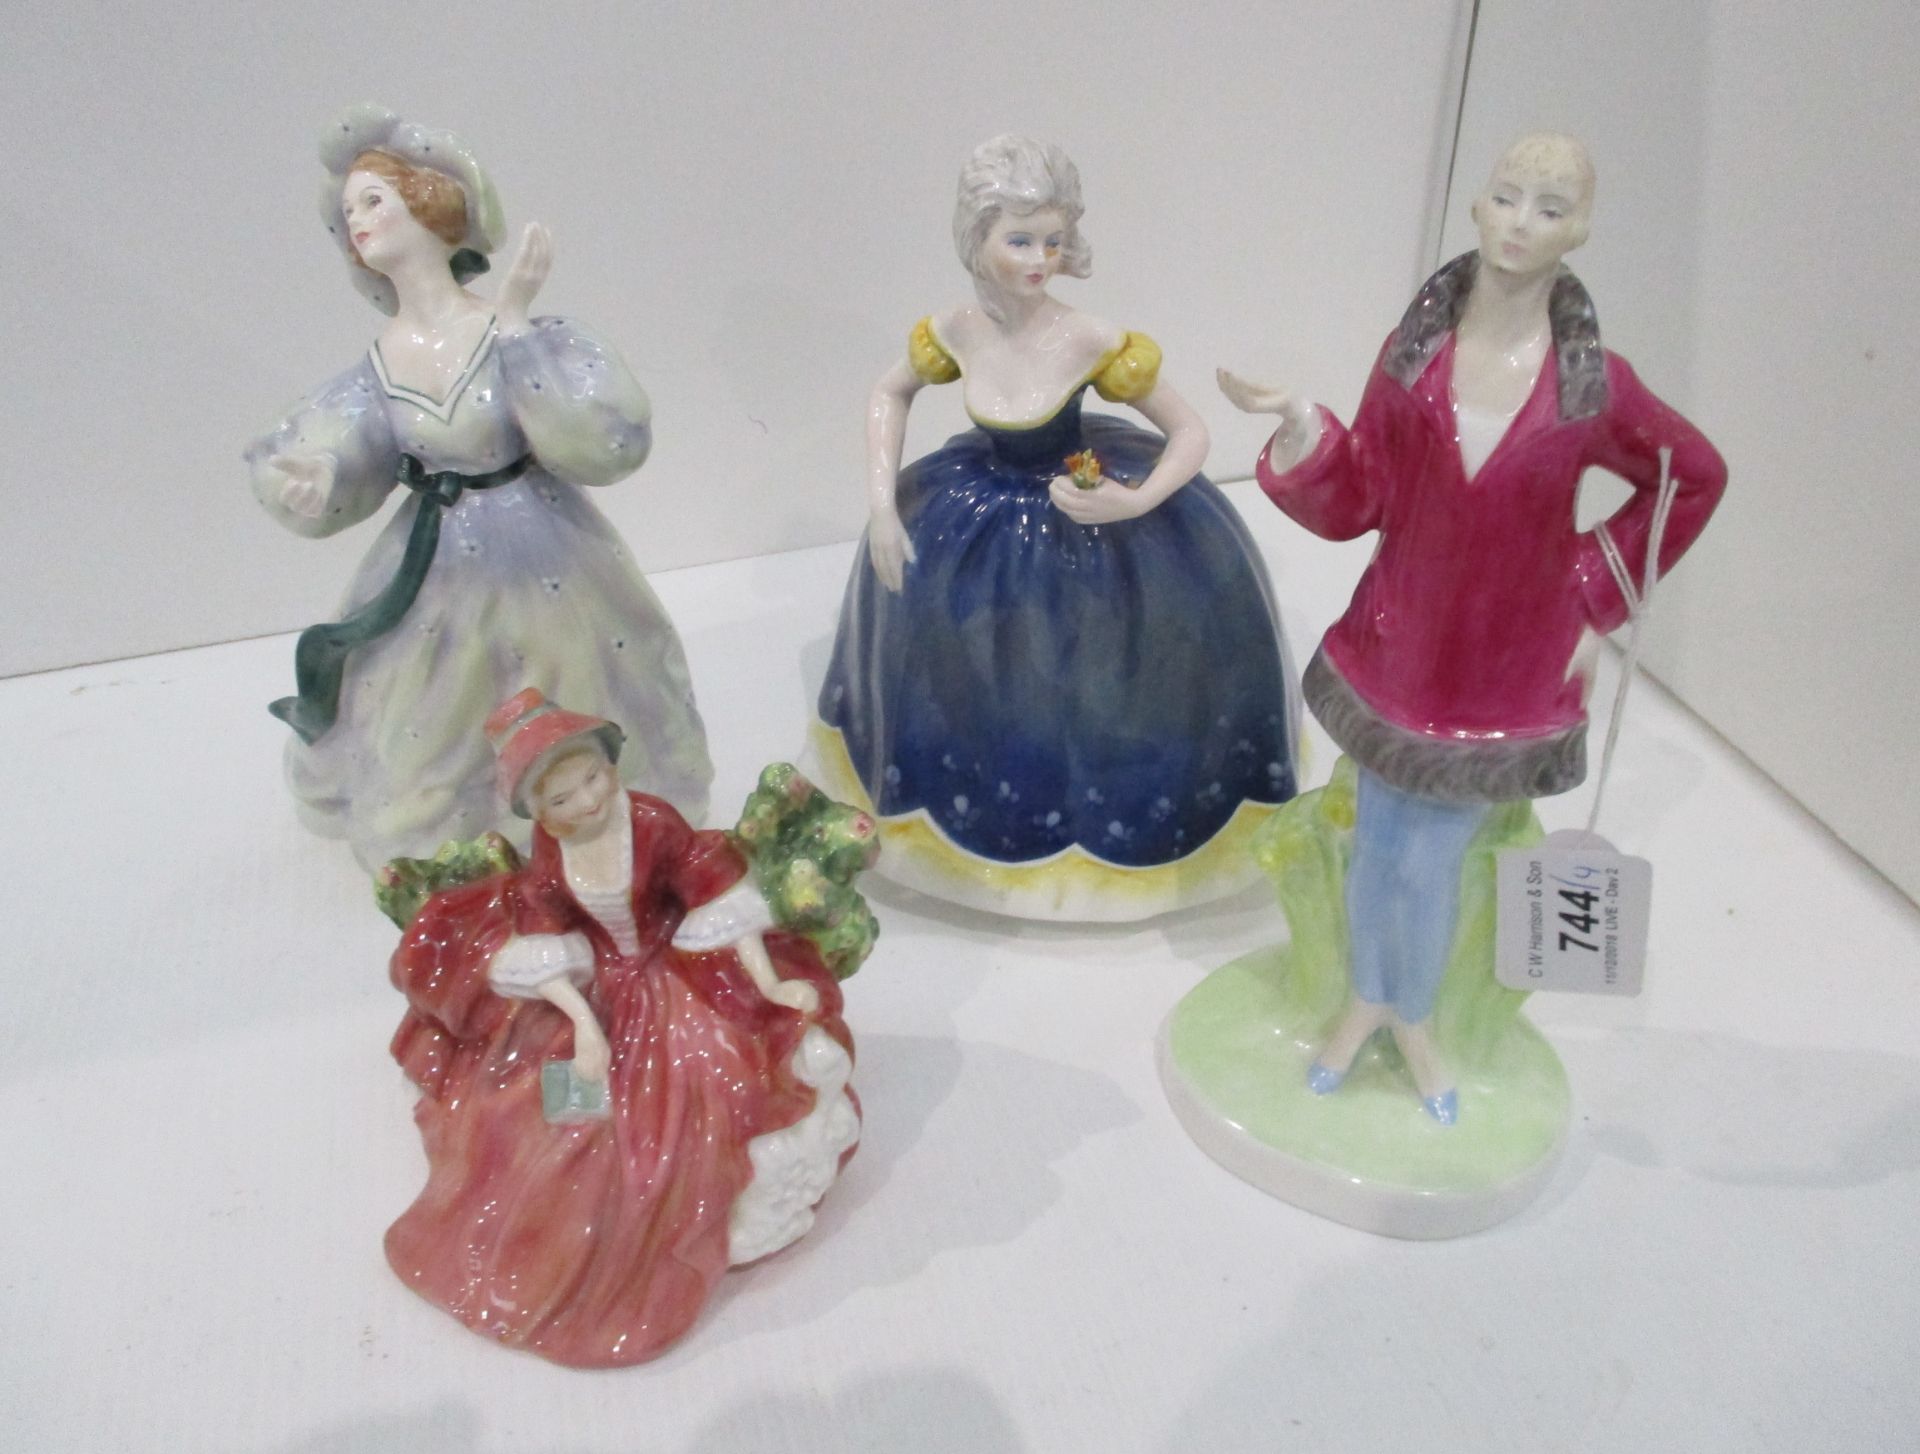 Two Royal Doulton ladies 'Grand Manner' and 'Lydia' and two Coalport ladies 'Collette' and 'Miss